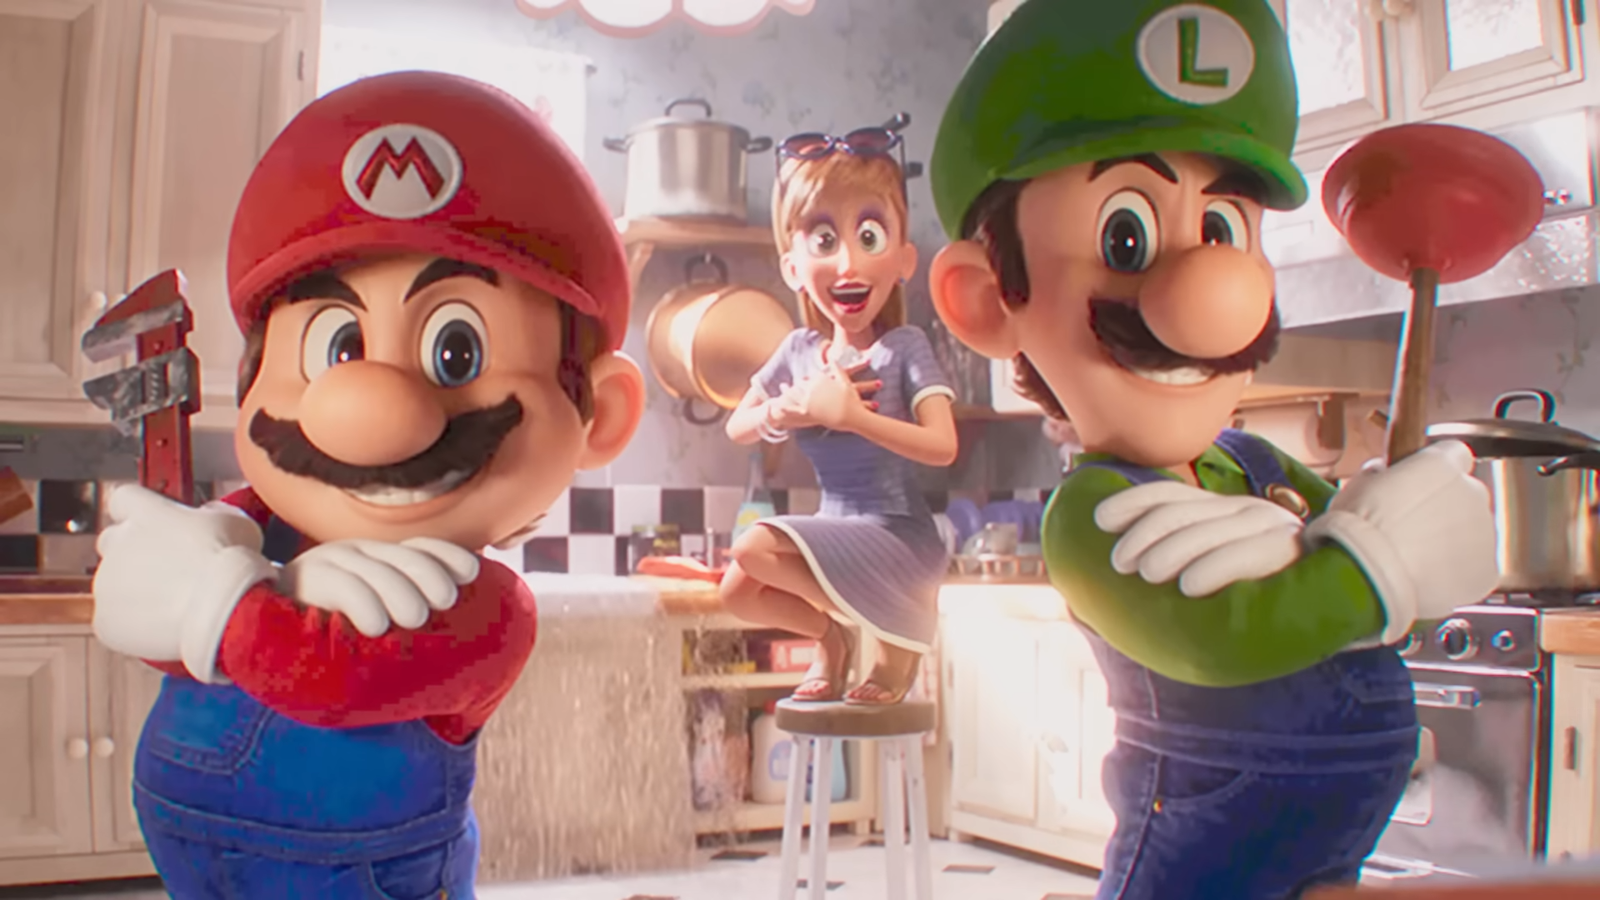 Super-Mario-Bros.-Plumbing-Commercial-0-7-screenshot.png?width=1600&height=900&fit=crop&quality=100&format=png&enable=upscale&auto=webp